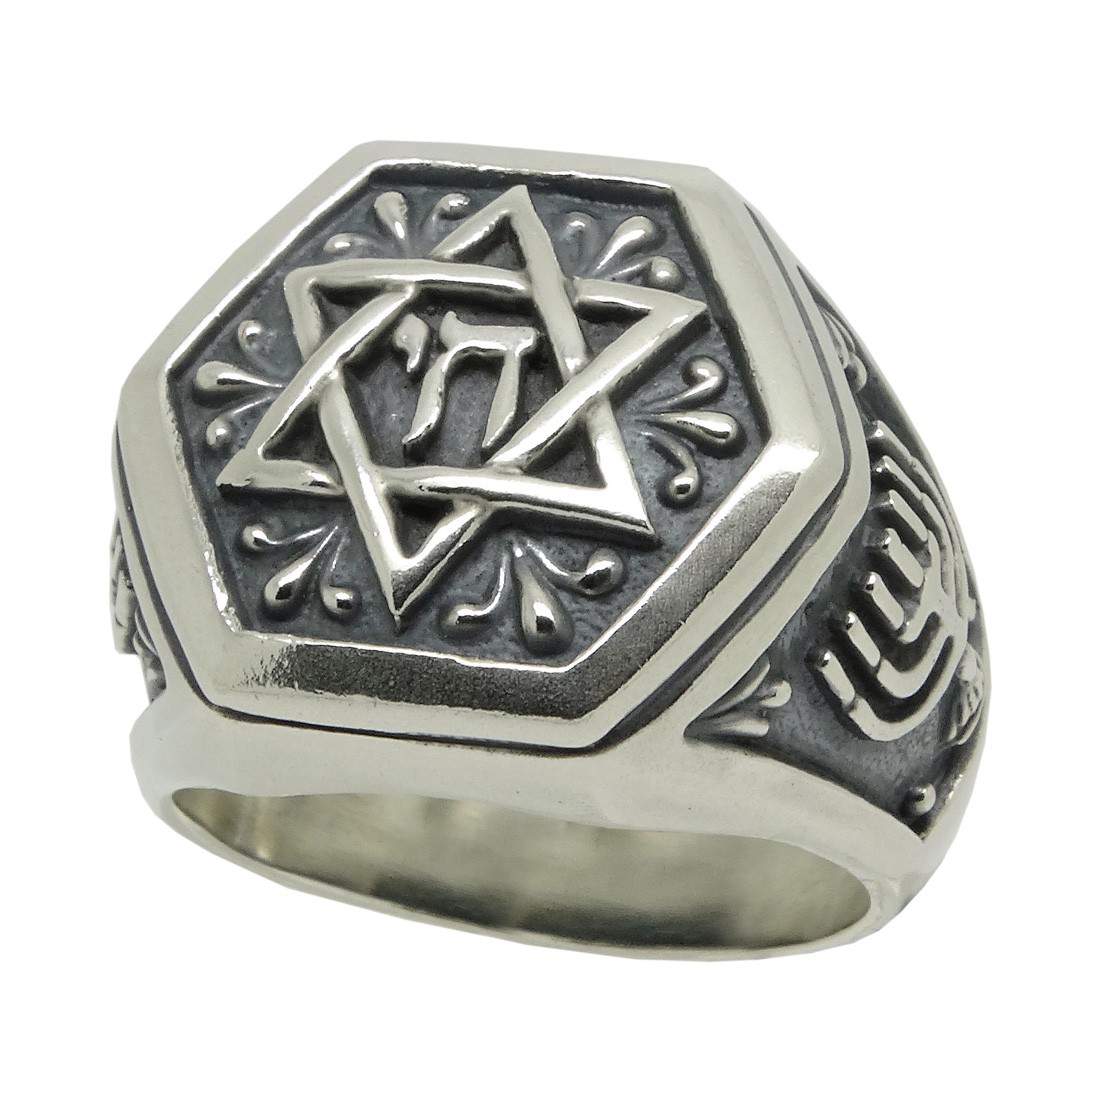 Silver Faced Polished Ring. Constellation Patron Star Of David Amulet Stainless Steel Statement Ring